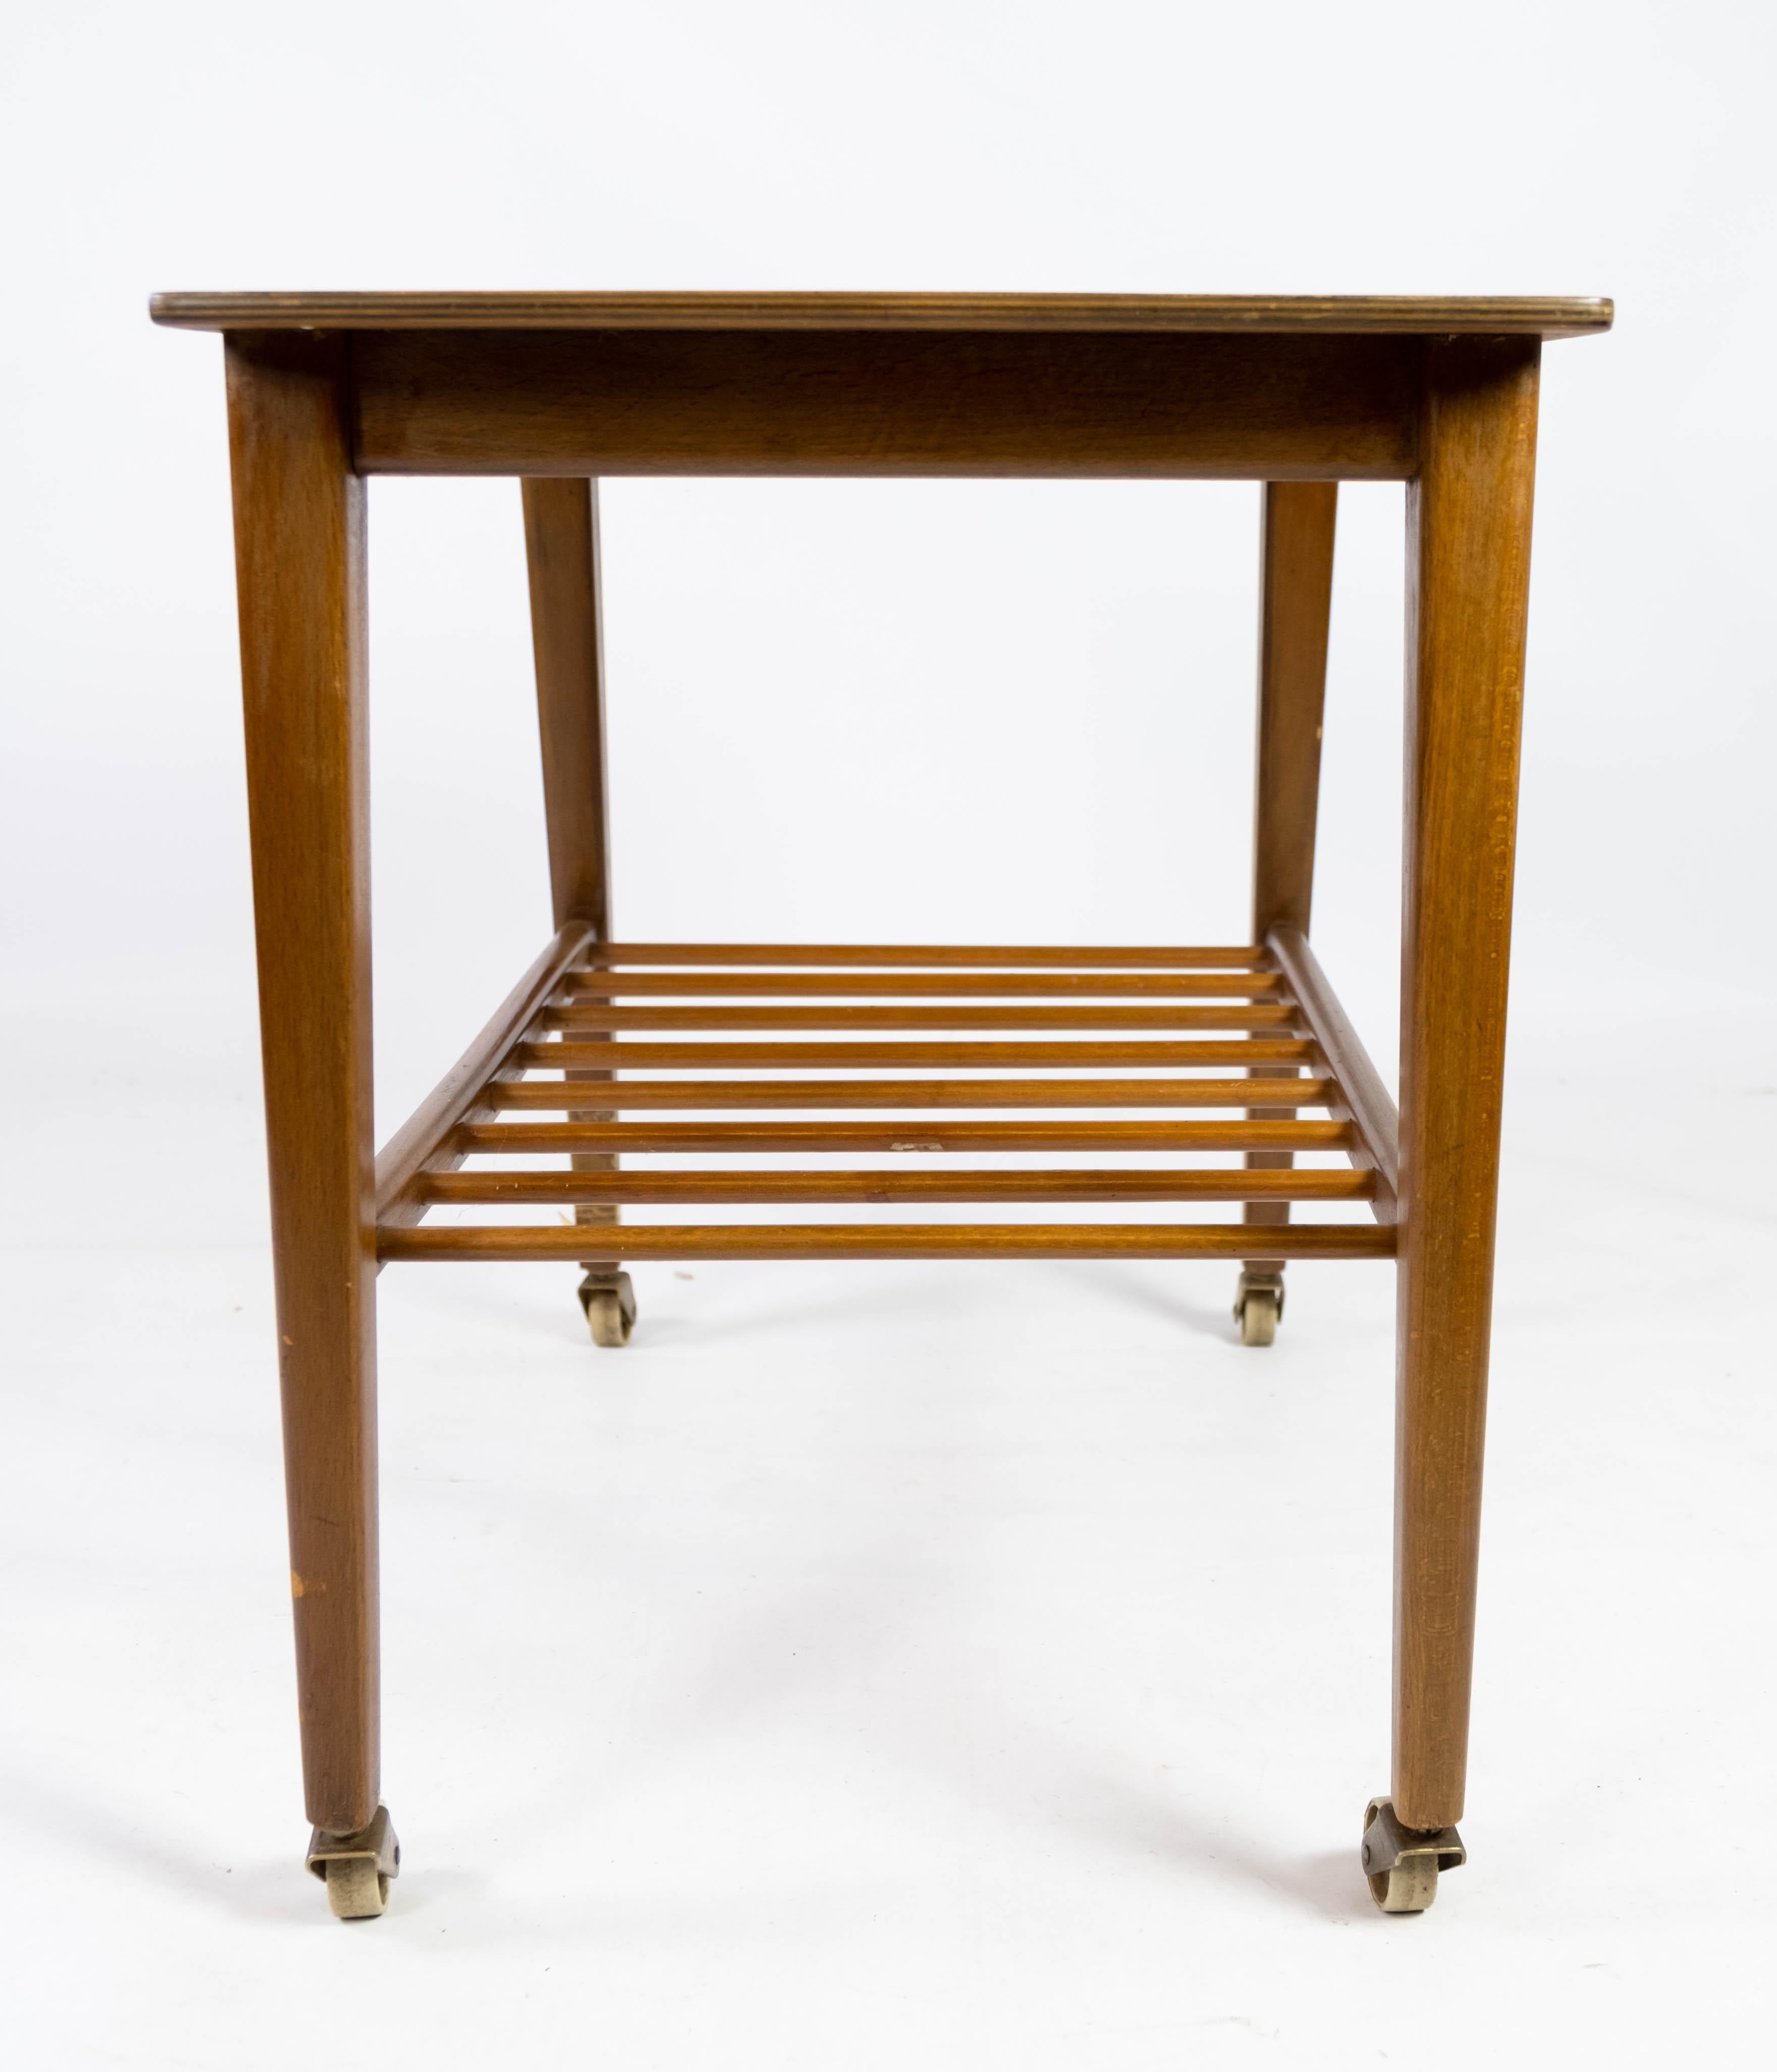 Mid-20th Century Side Table With Shelf & On Wheels Made In Teak, Danish Design From 1960s For Sale